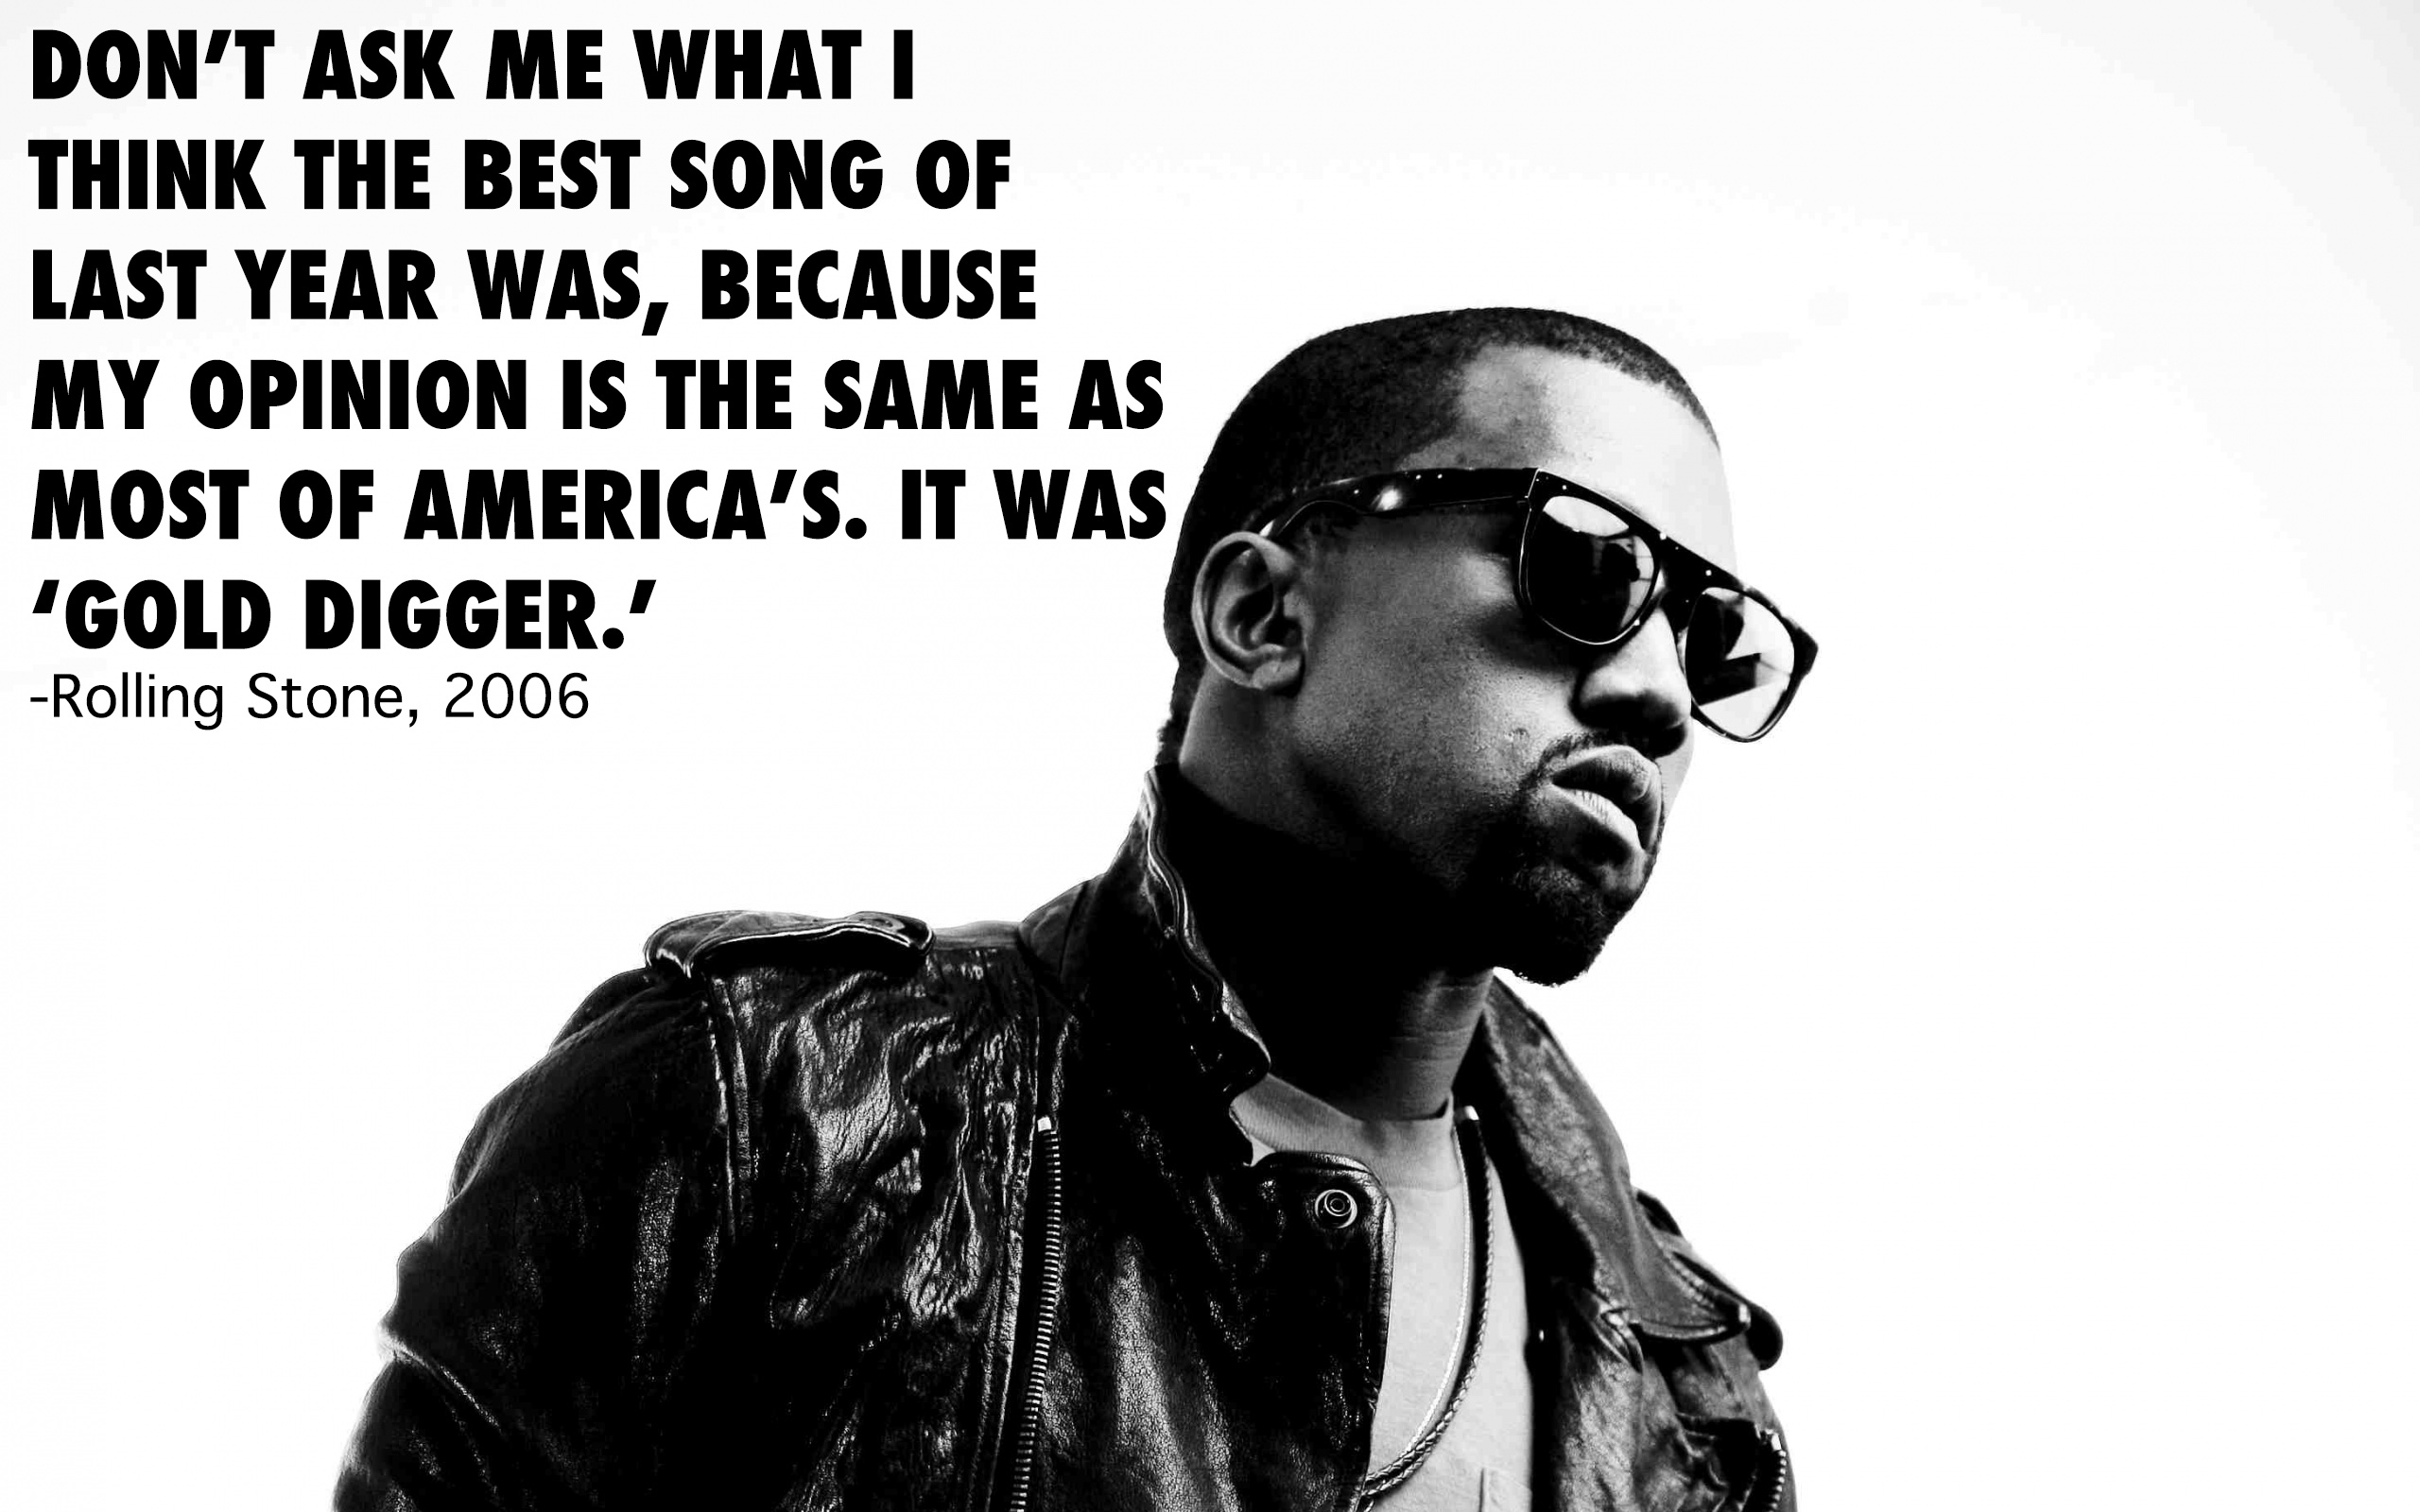 kanye west - Don'T Ask Me What I Think The Best Song Of Last Year Was, Because My Opinion Is The Same As Most Of America'S. It Was "Gold Digger.' Rolling Stone, 2006